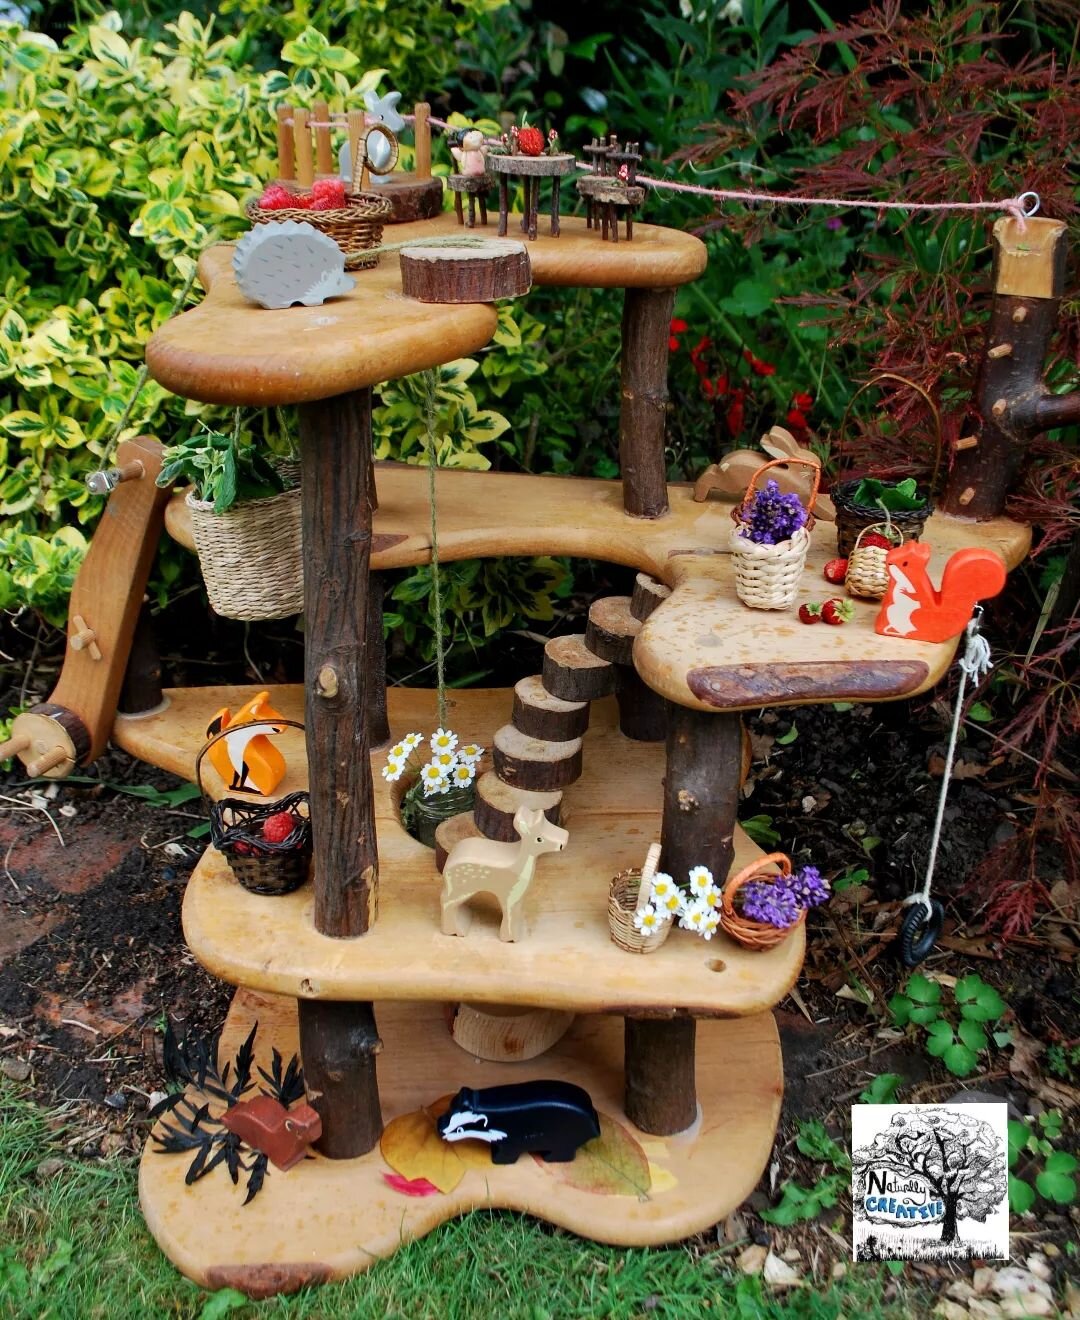 Treehouse small world with woodland wooden animals, natural materials and or picturebooks, The Visitors and From the Shadows! 🥰🦋🌸Find them here: https://www.naturallycreative.net/shop

#nature #outdoorplay #smallworldplay #fromtheshadowspictureboo